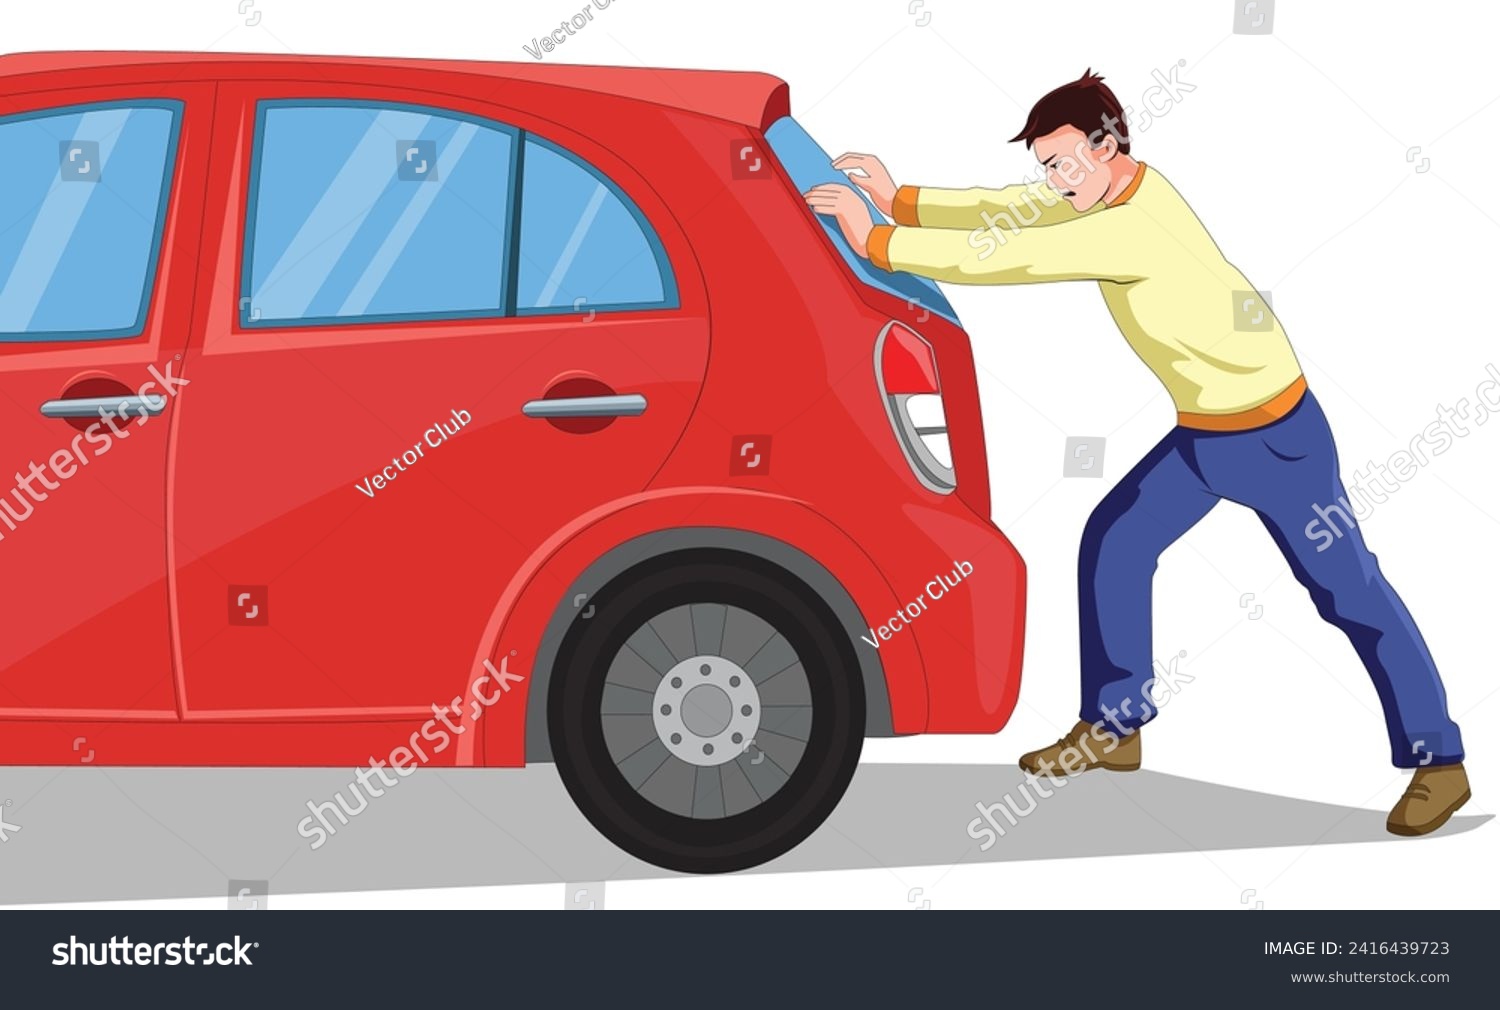 SVG of Man pushing car with his hands svg